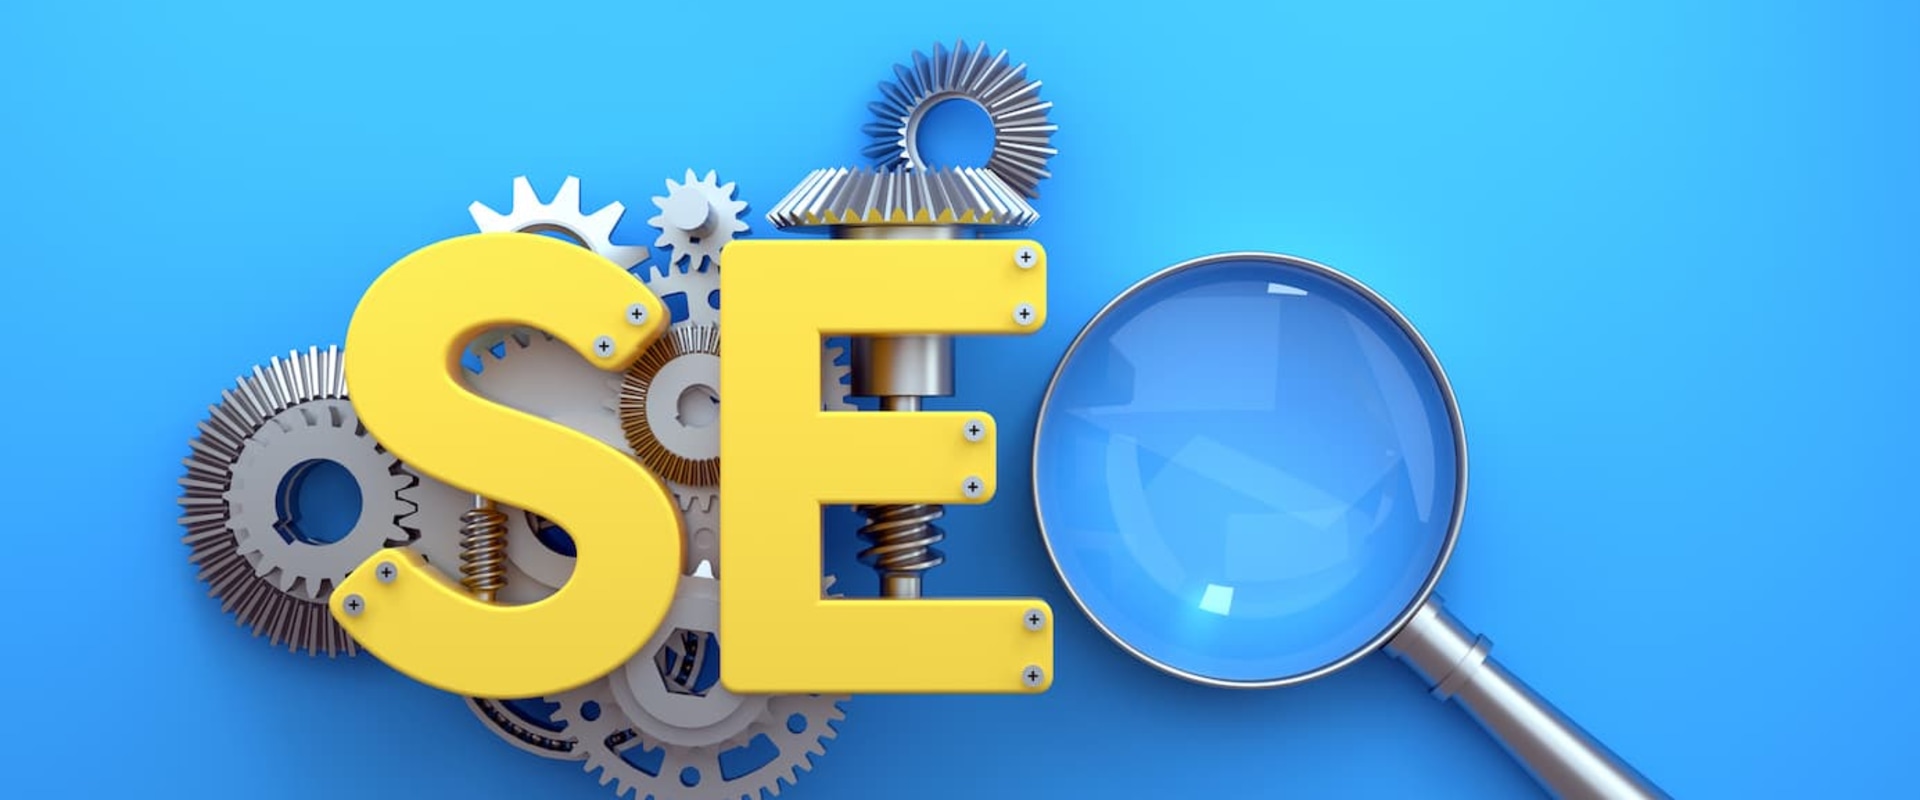 How to achieve search engine optimization?